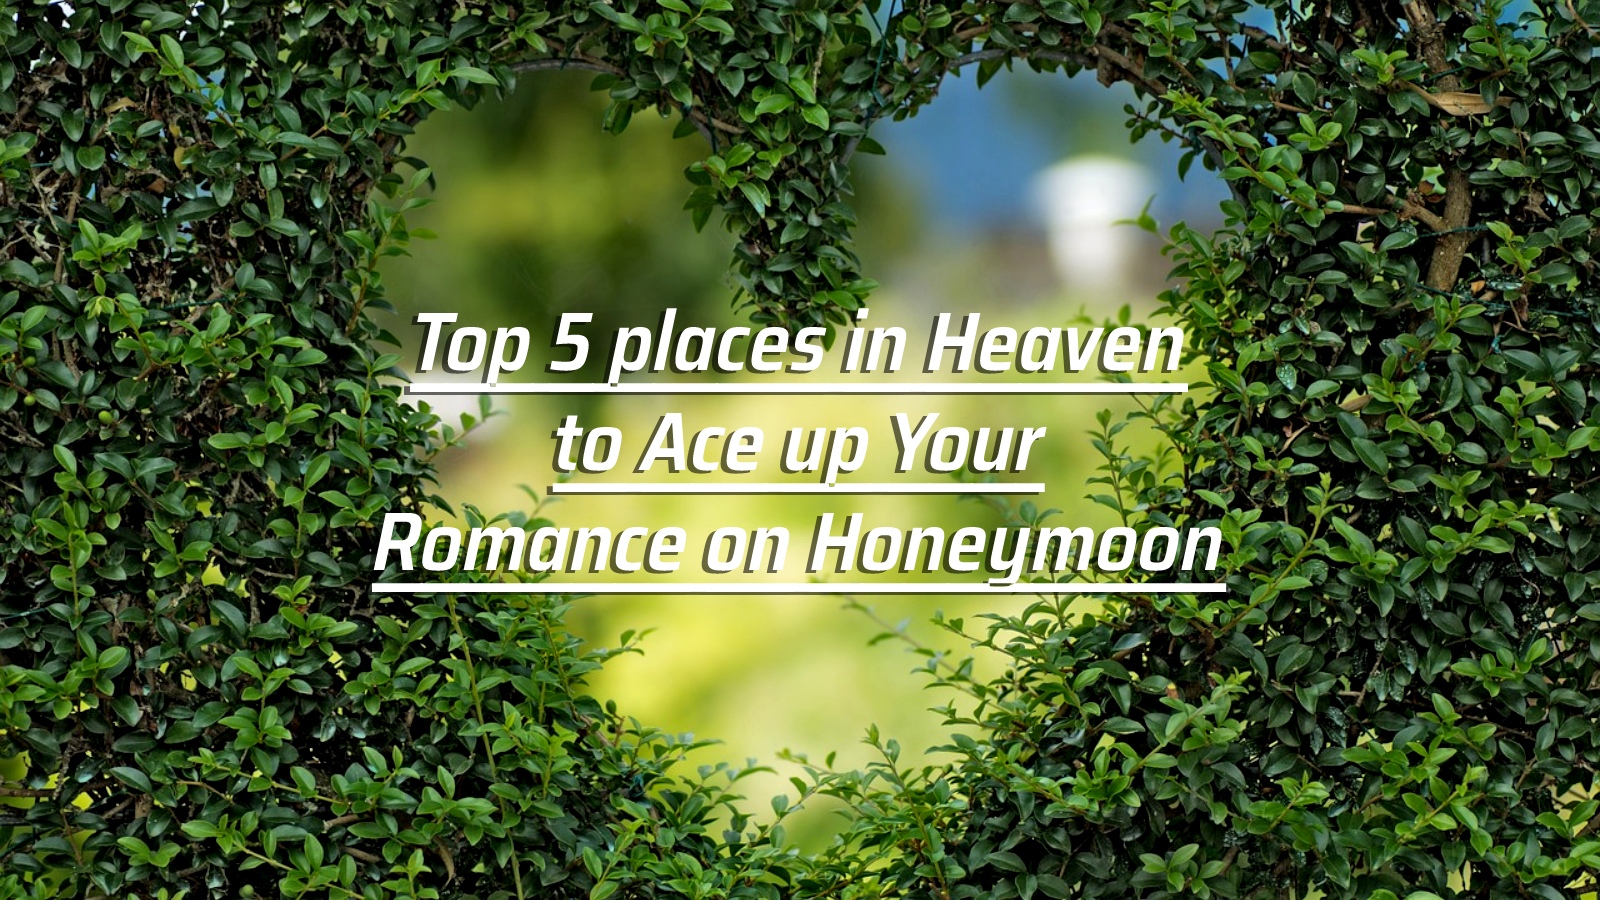 Top 5 places in Heaven to Ace up Your Romance on Honeymoon